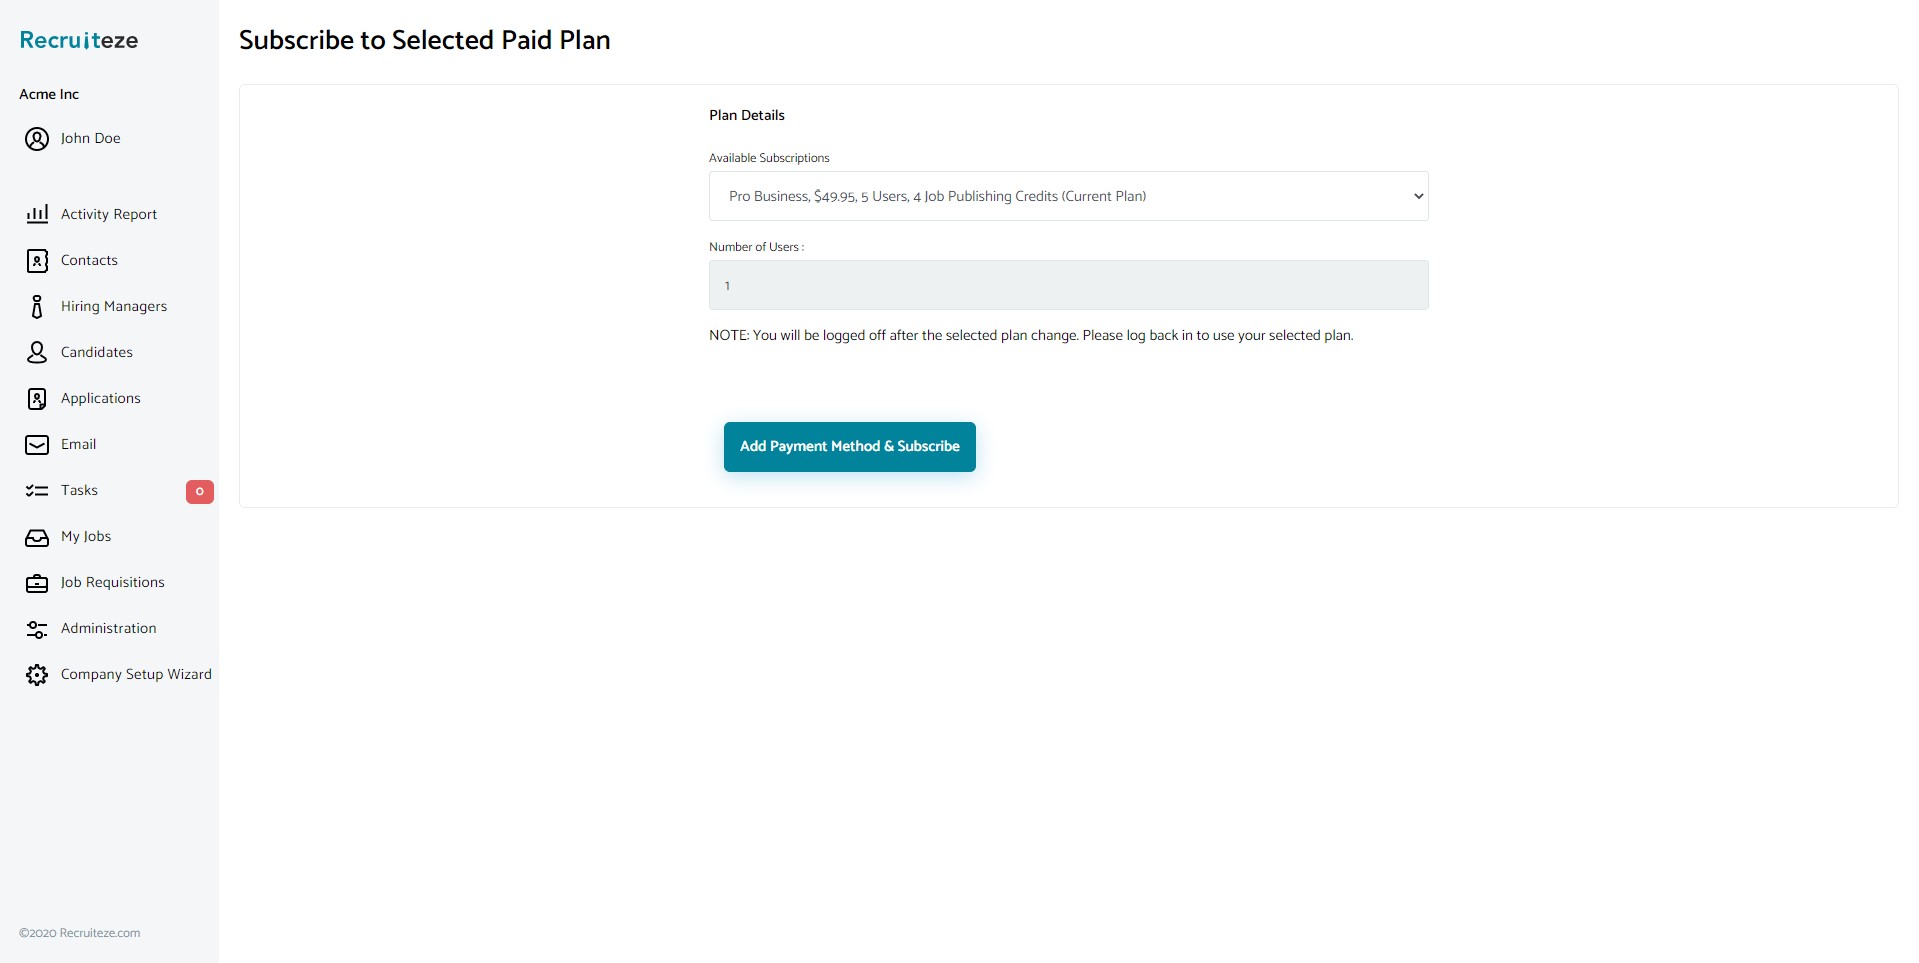 Applicant Tracking System: Subscribe to a paid plan